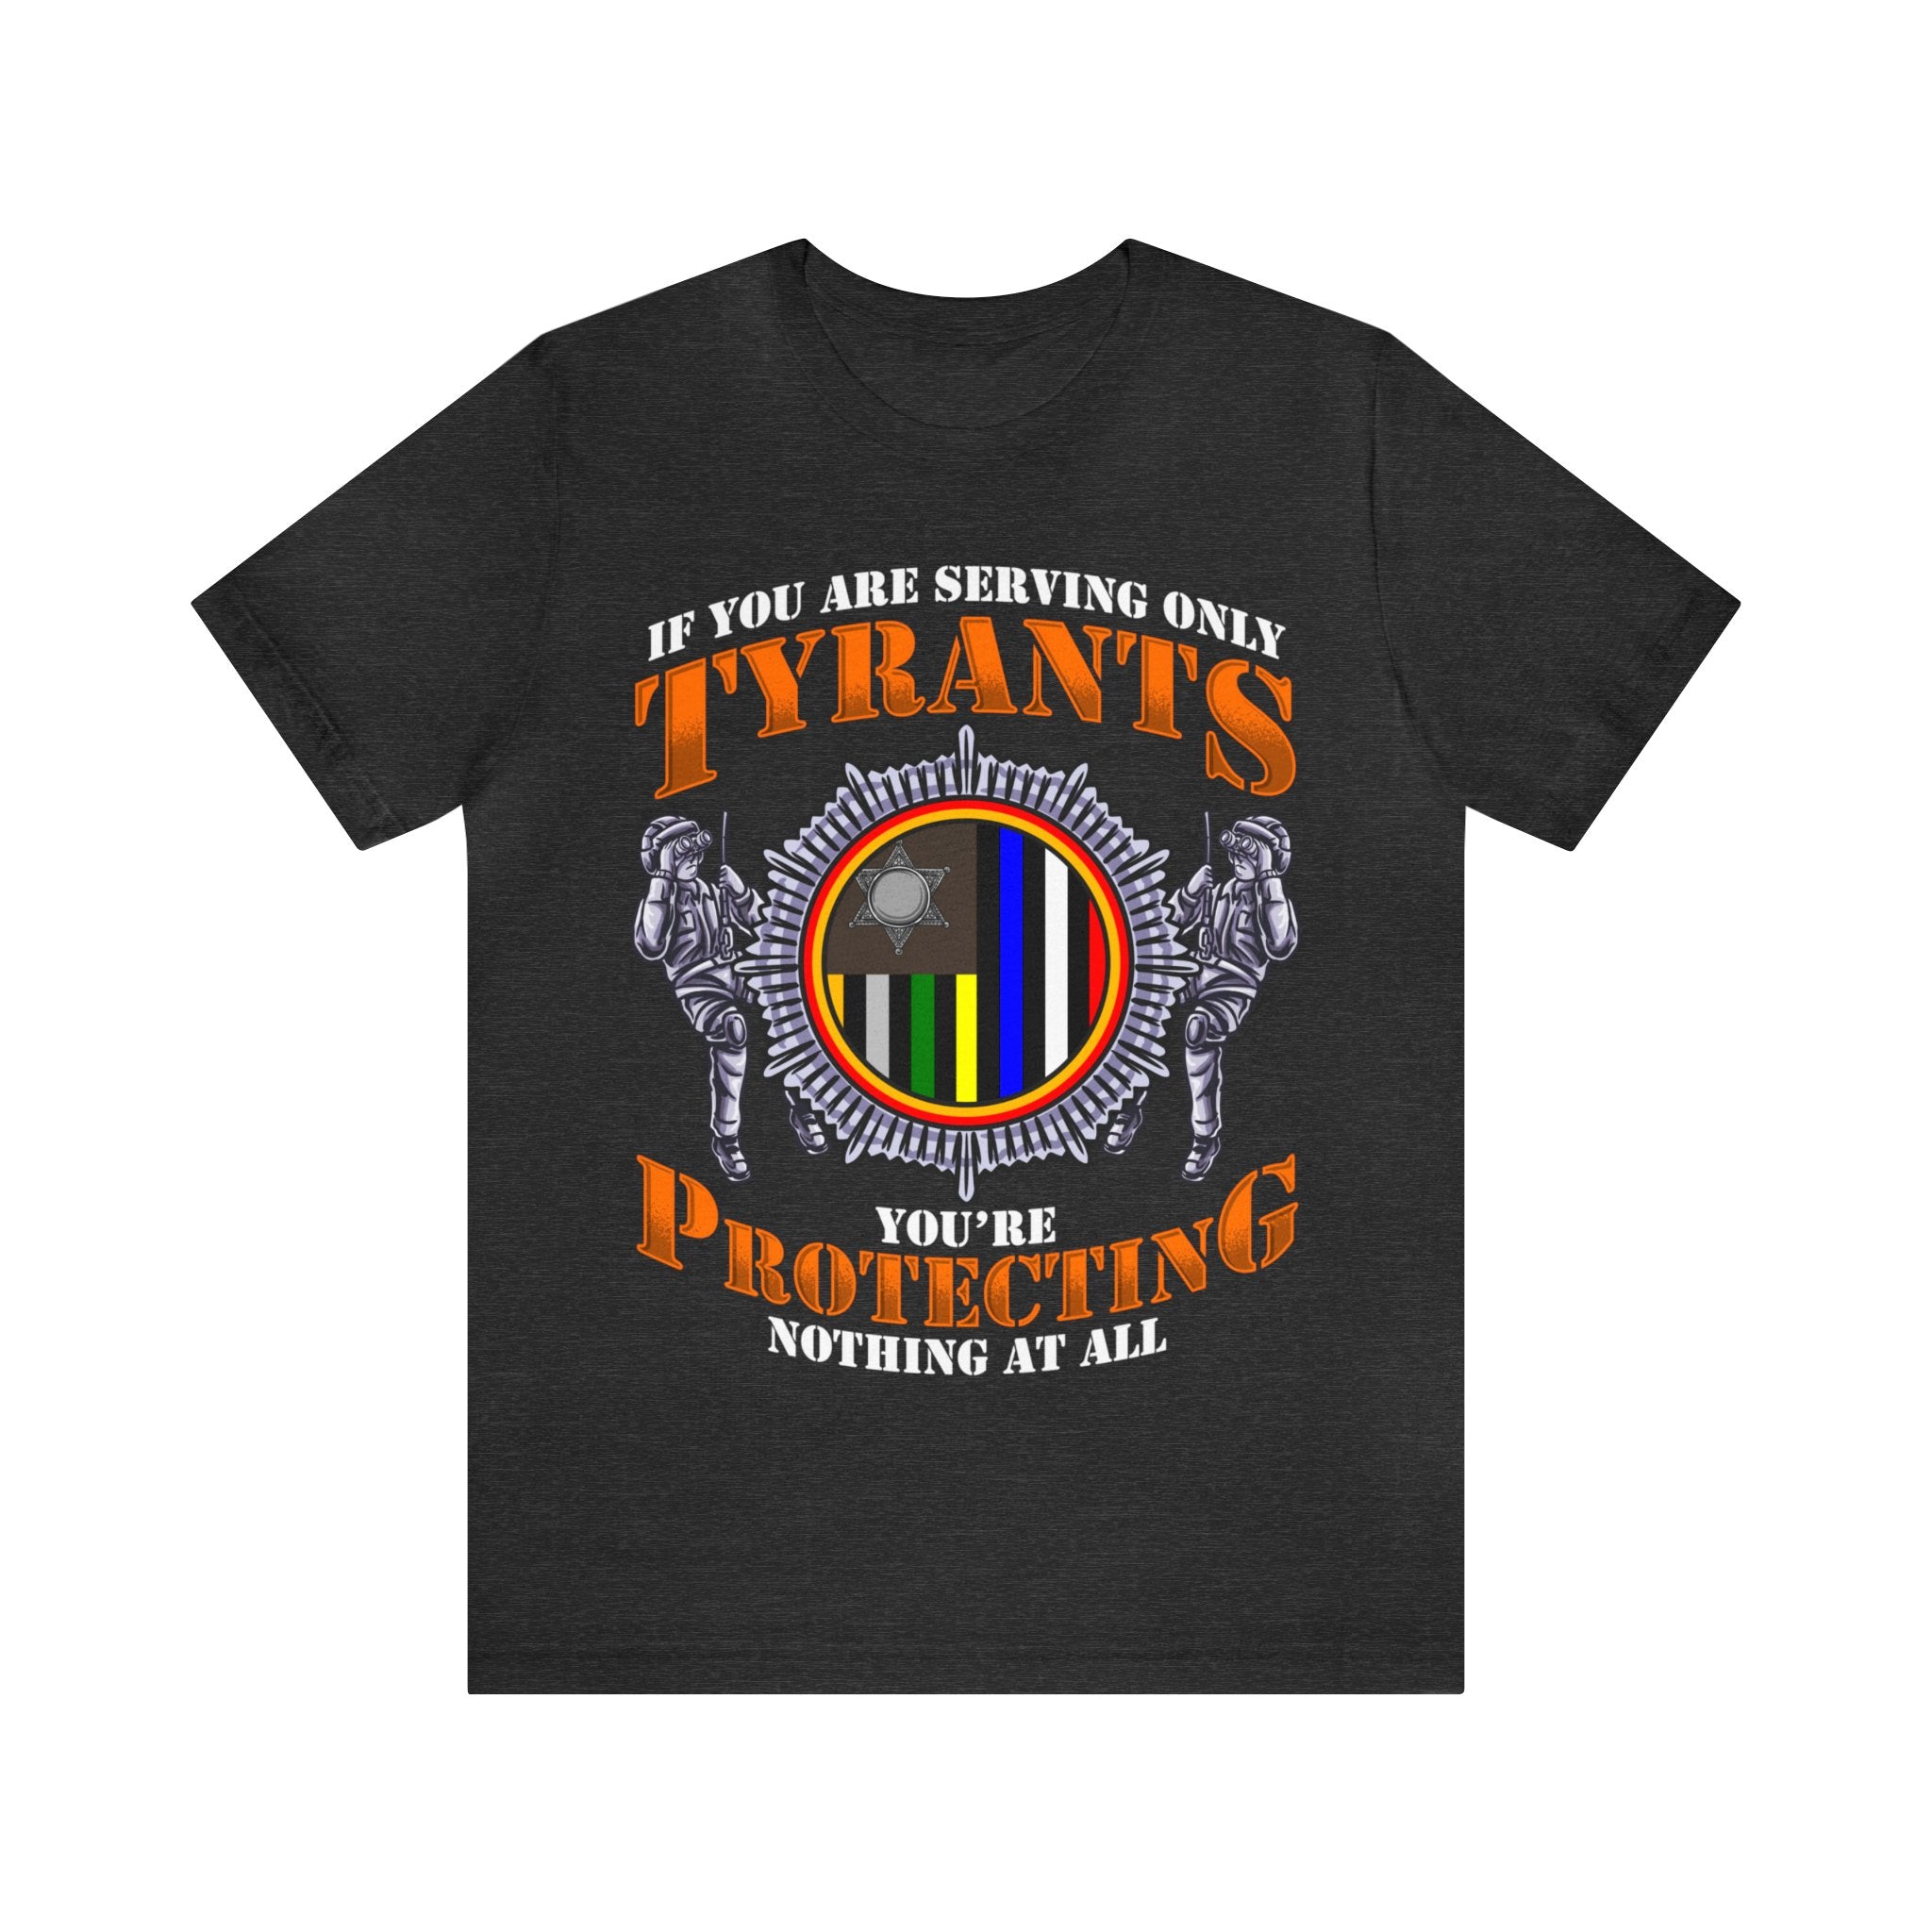 Thin Search & Rescue Line Tee - Tyrants/Protecting